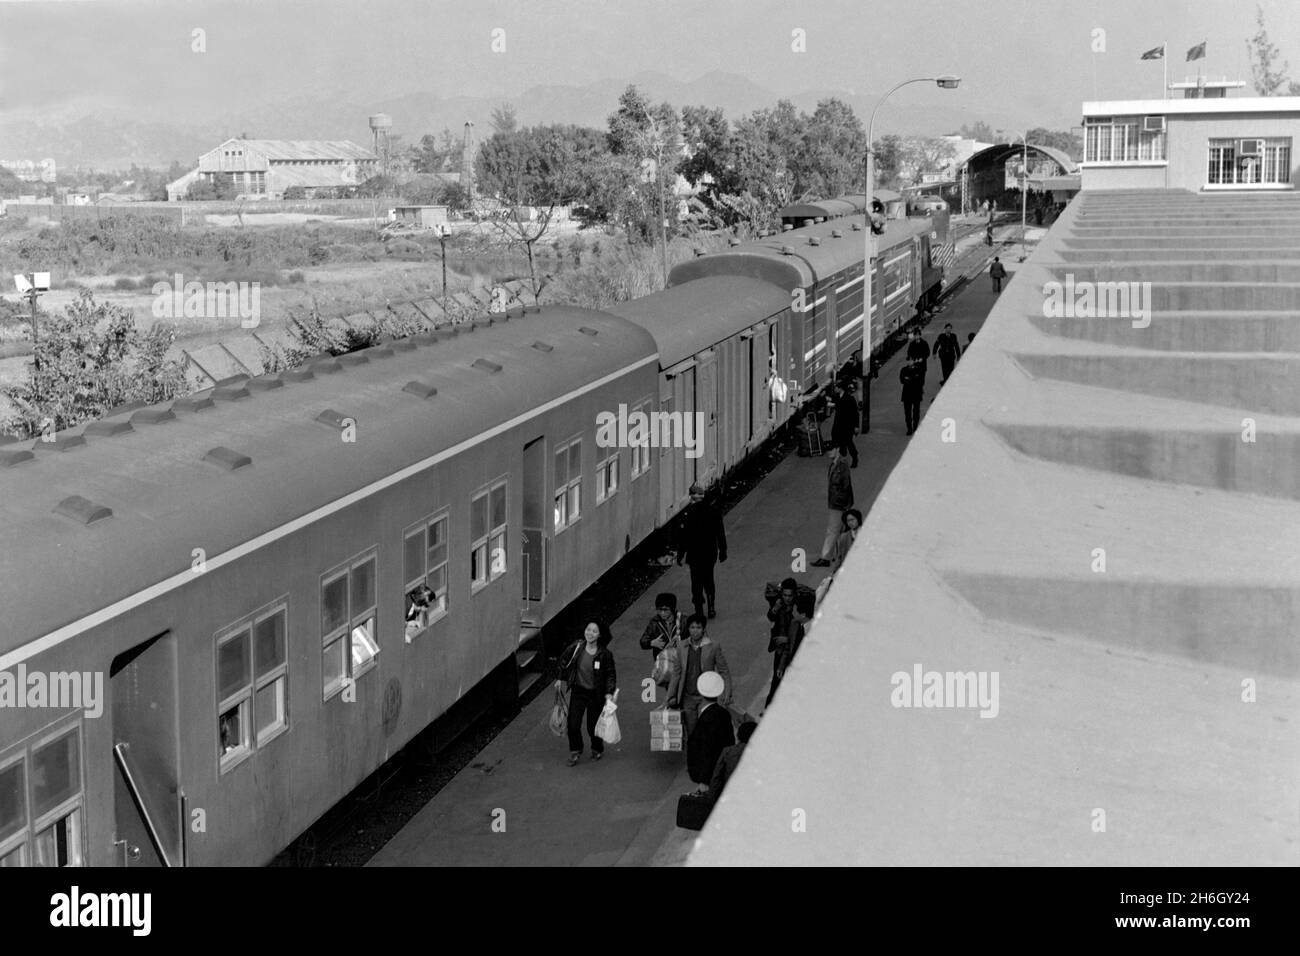 Lo Wu Railway Station, Hong Kong. View of passengers getting off a train, at the border crossing, Lunar New Year, 1981. Looking north, Shenzhen, China is visible at the top of this photo. The diesel trains were phased out when the Kowloon-Canton Railway (HK section) was electrified in the early 1980s Stock Photo